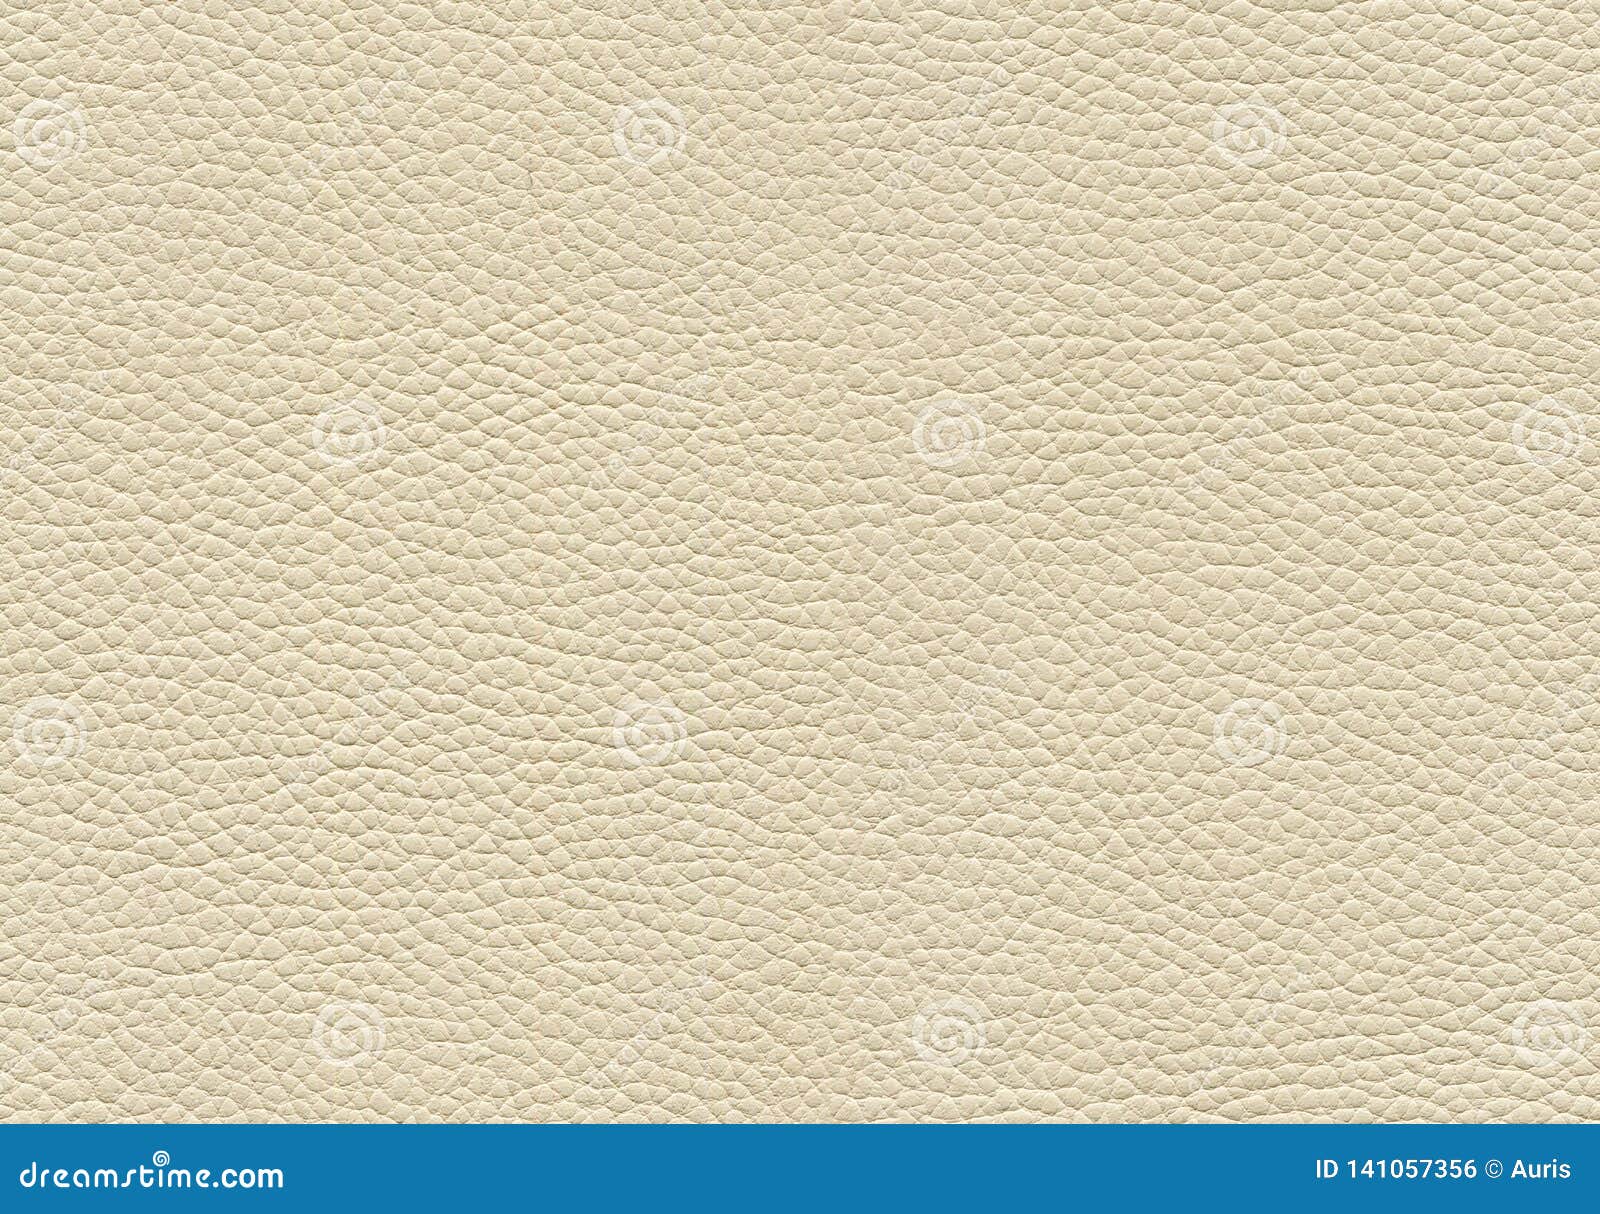 Seamless leather texture stock photo. Image of texture - 141057356